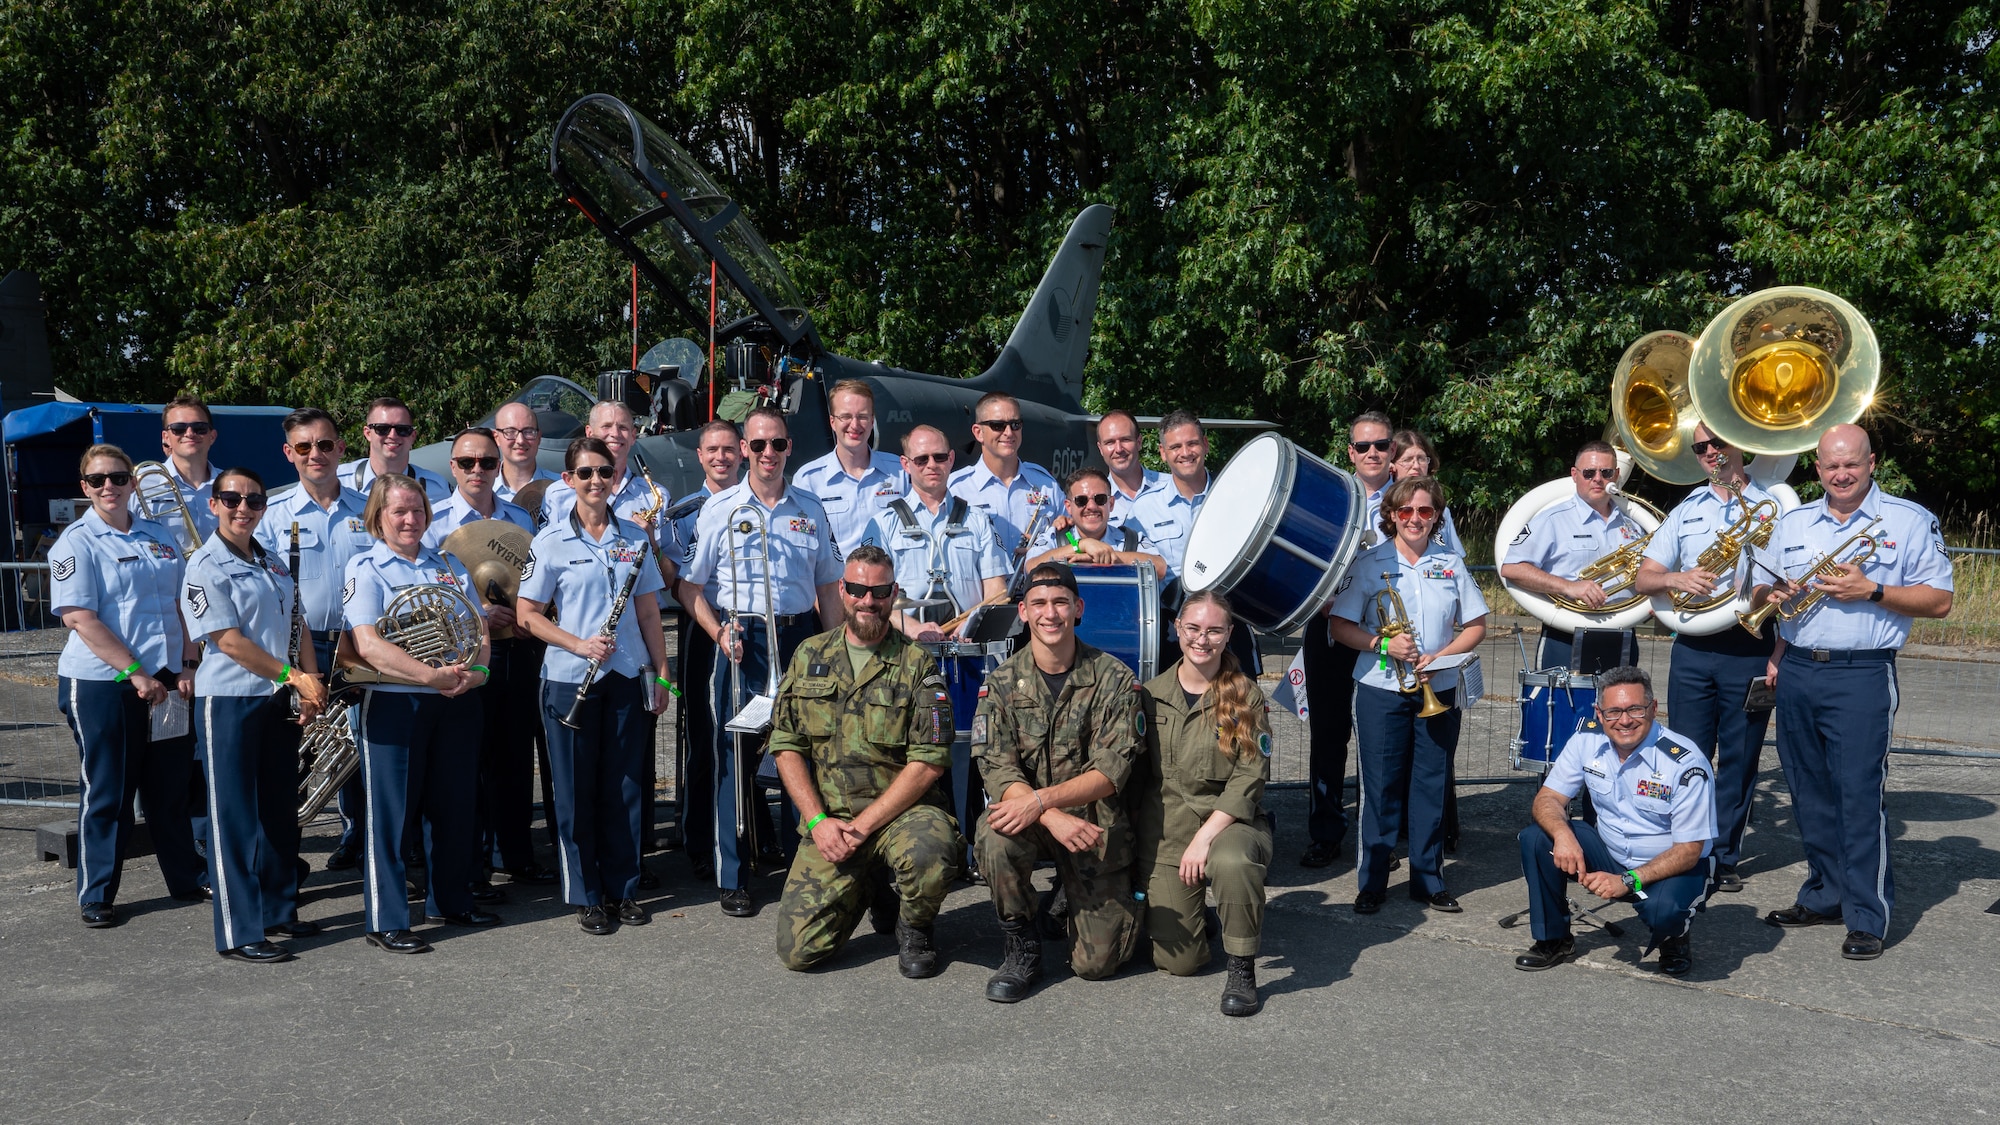 U.S. Air Force Airmen assigned to the U.S. Air Forces in Europe Ceremonial Band, and members of the Polish and Czech military, pose for a group photo during the NATO Days event at Leoš Janáček Airport in Ostrava, Czech Republic, Sept. 17, 2023.